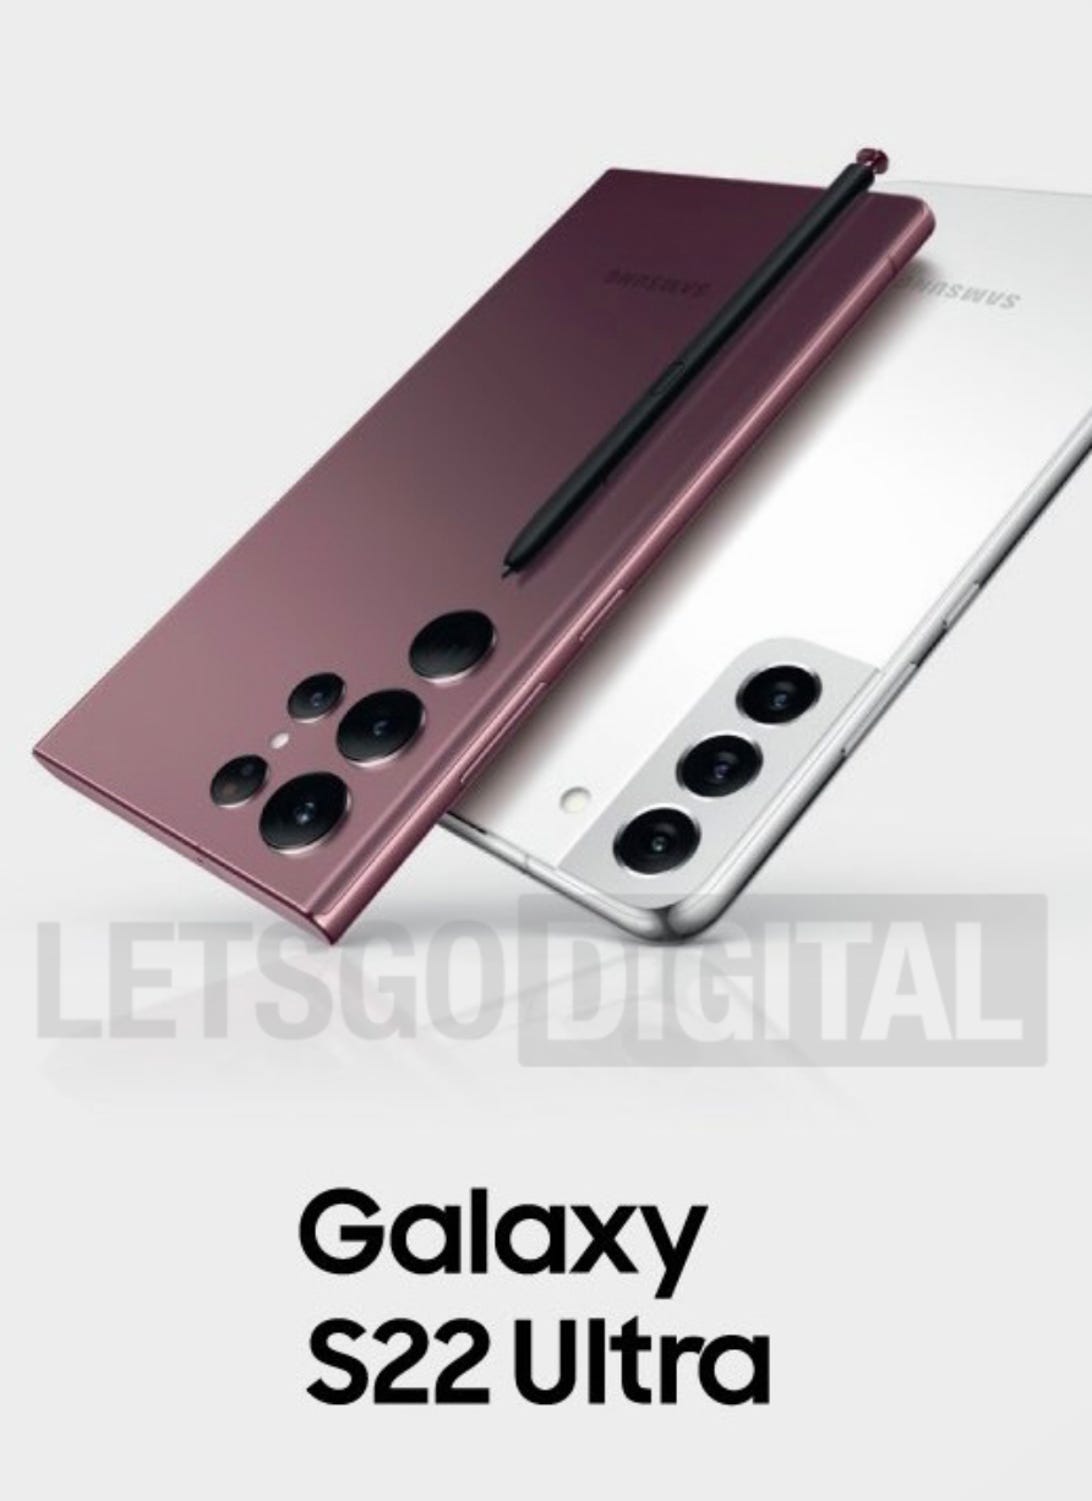 Galaxy S22 rumors: Leaked poster shows off Samsung’s S22 Ultra